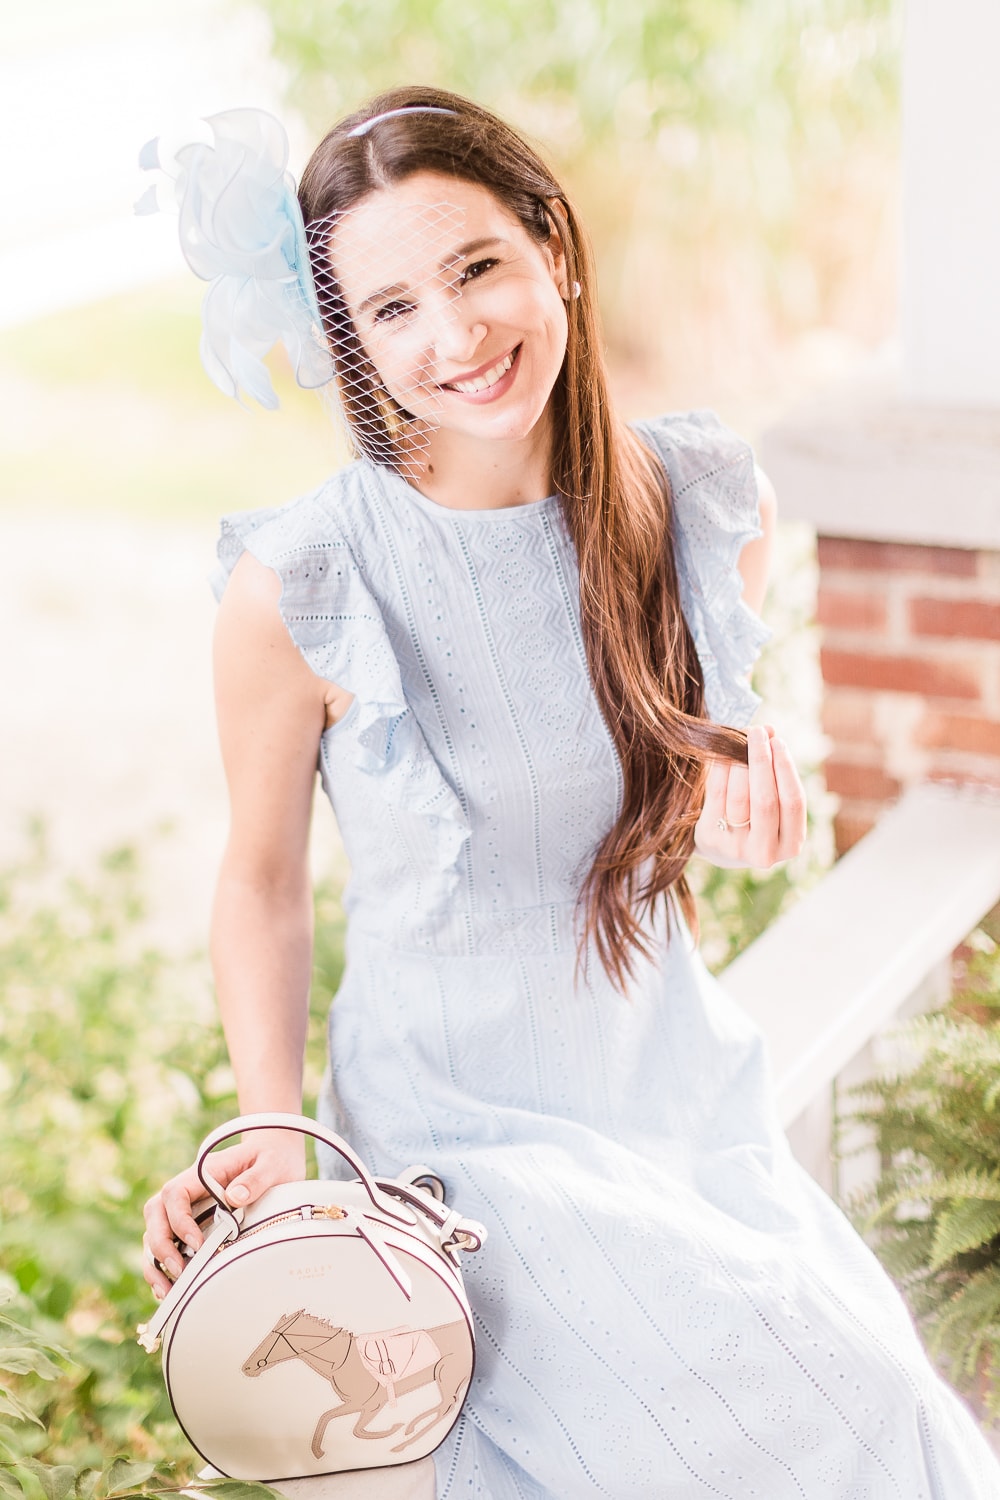 Light blue Kentucky derby outfit accessorized with a light blue fascinator and Radley London Royal Ascot crossbody bag by affordable fashion blogger Stephanie Ziajka on Diary of a Debutante